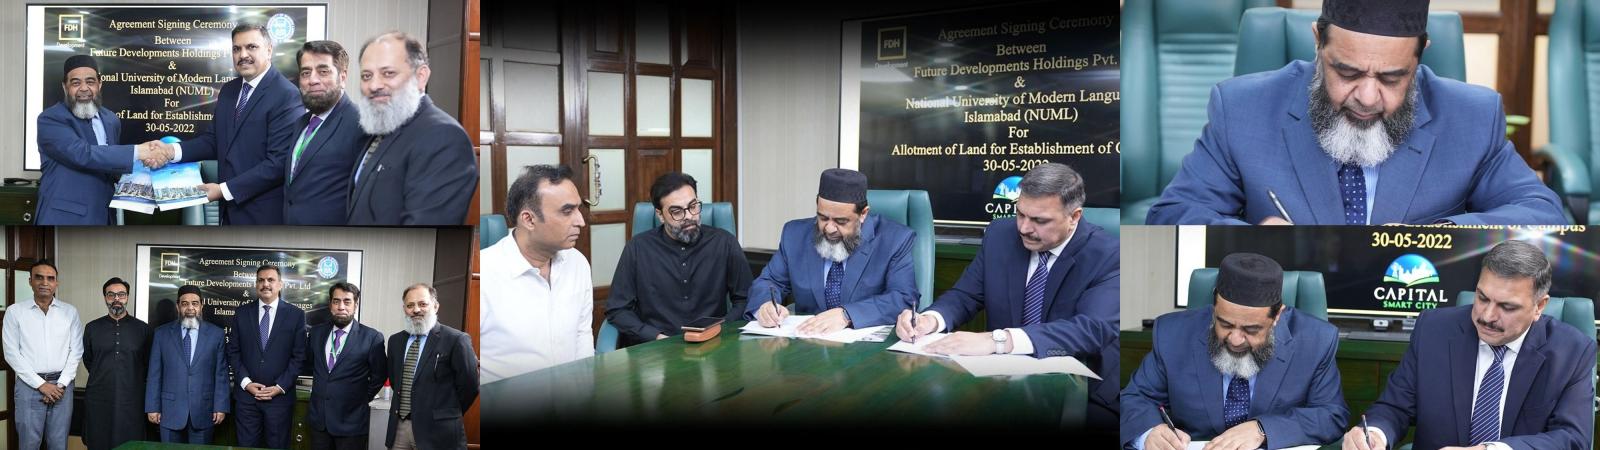 Agreement Singing Ceremony Between FDH and NUML